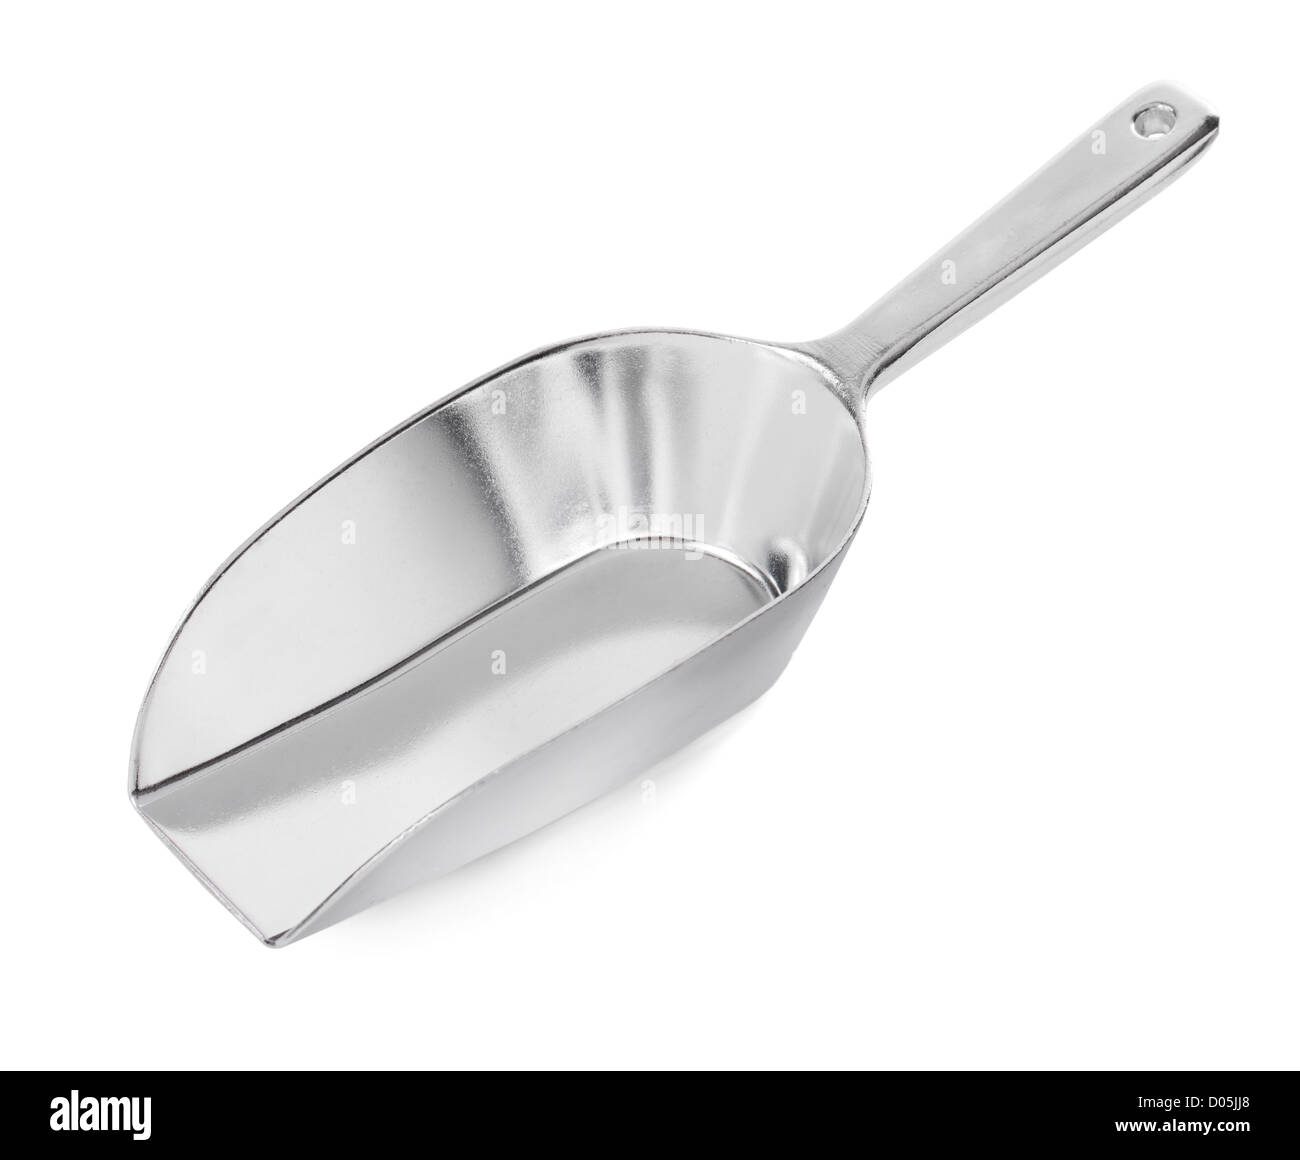 Aluminum transfer scoop used in cooking, isolated on white with natural shadow. Stock Photo